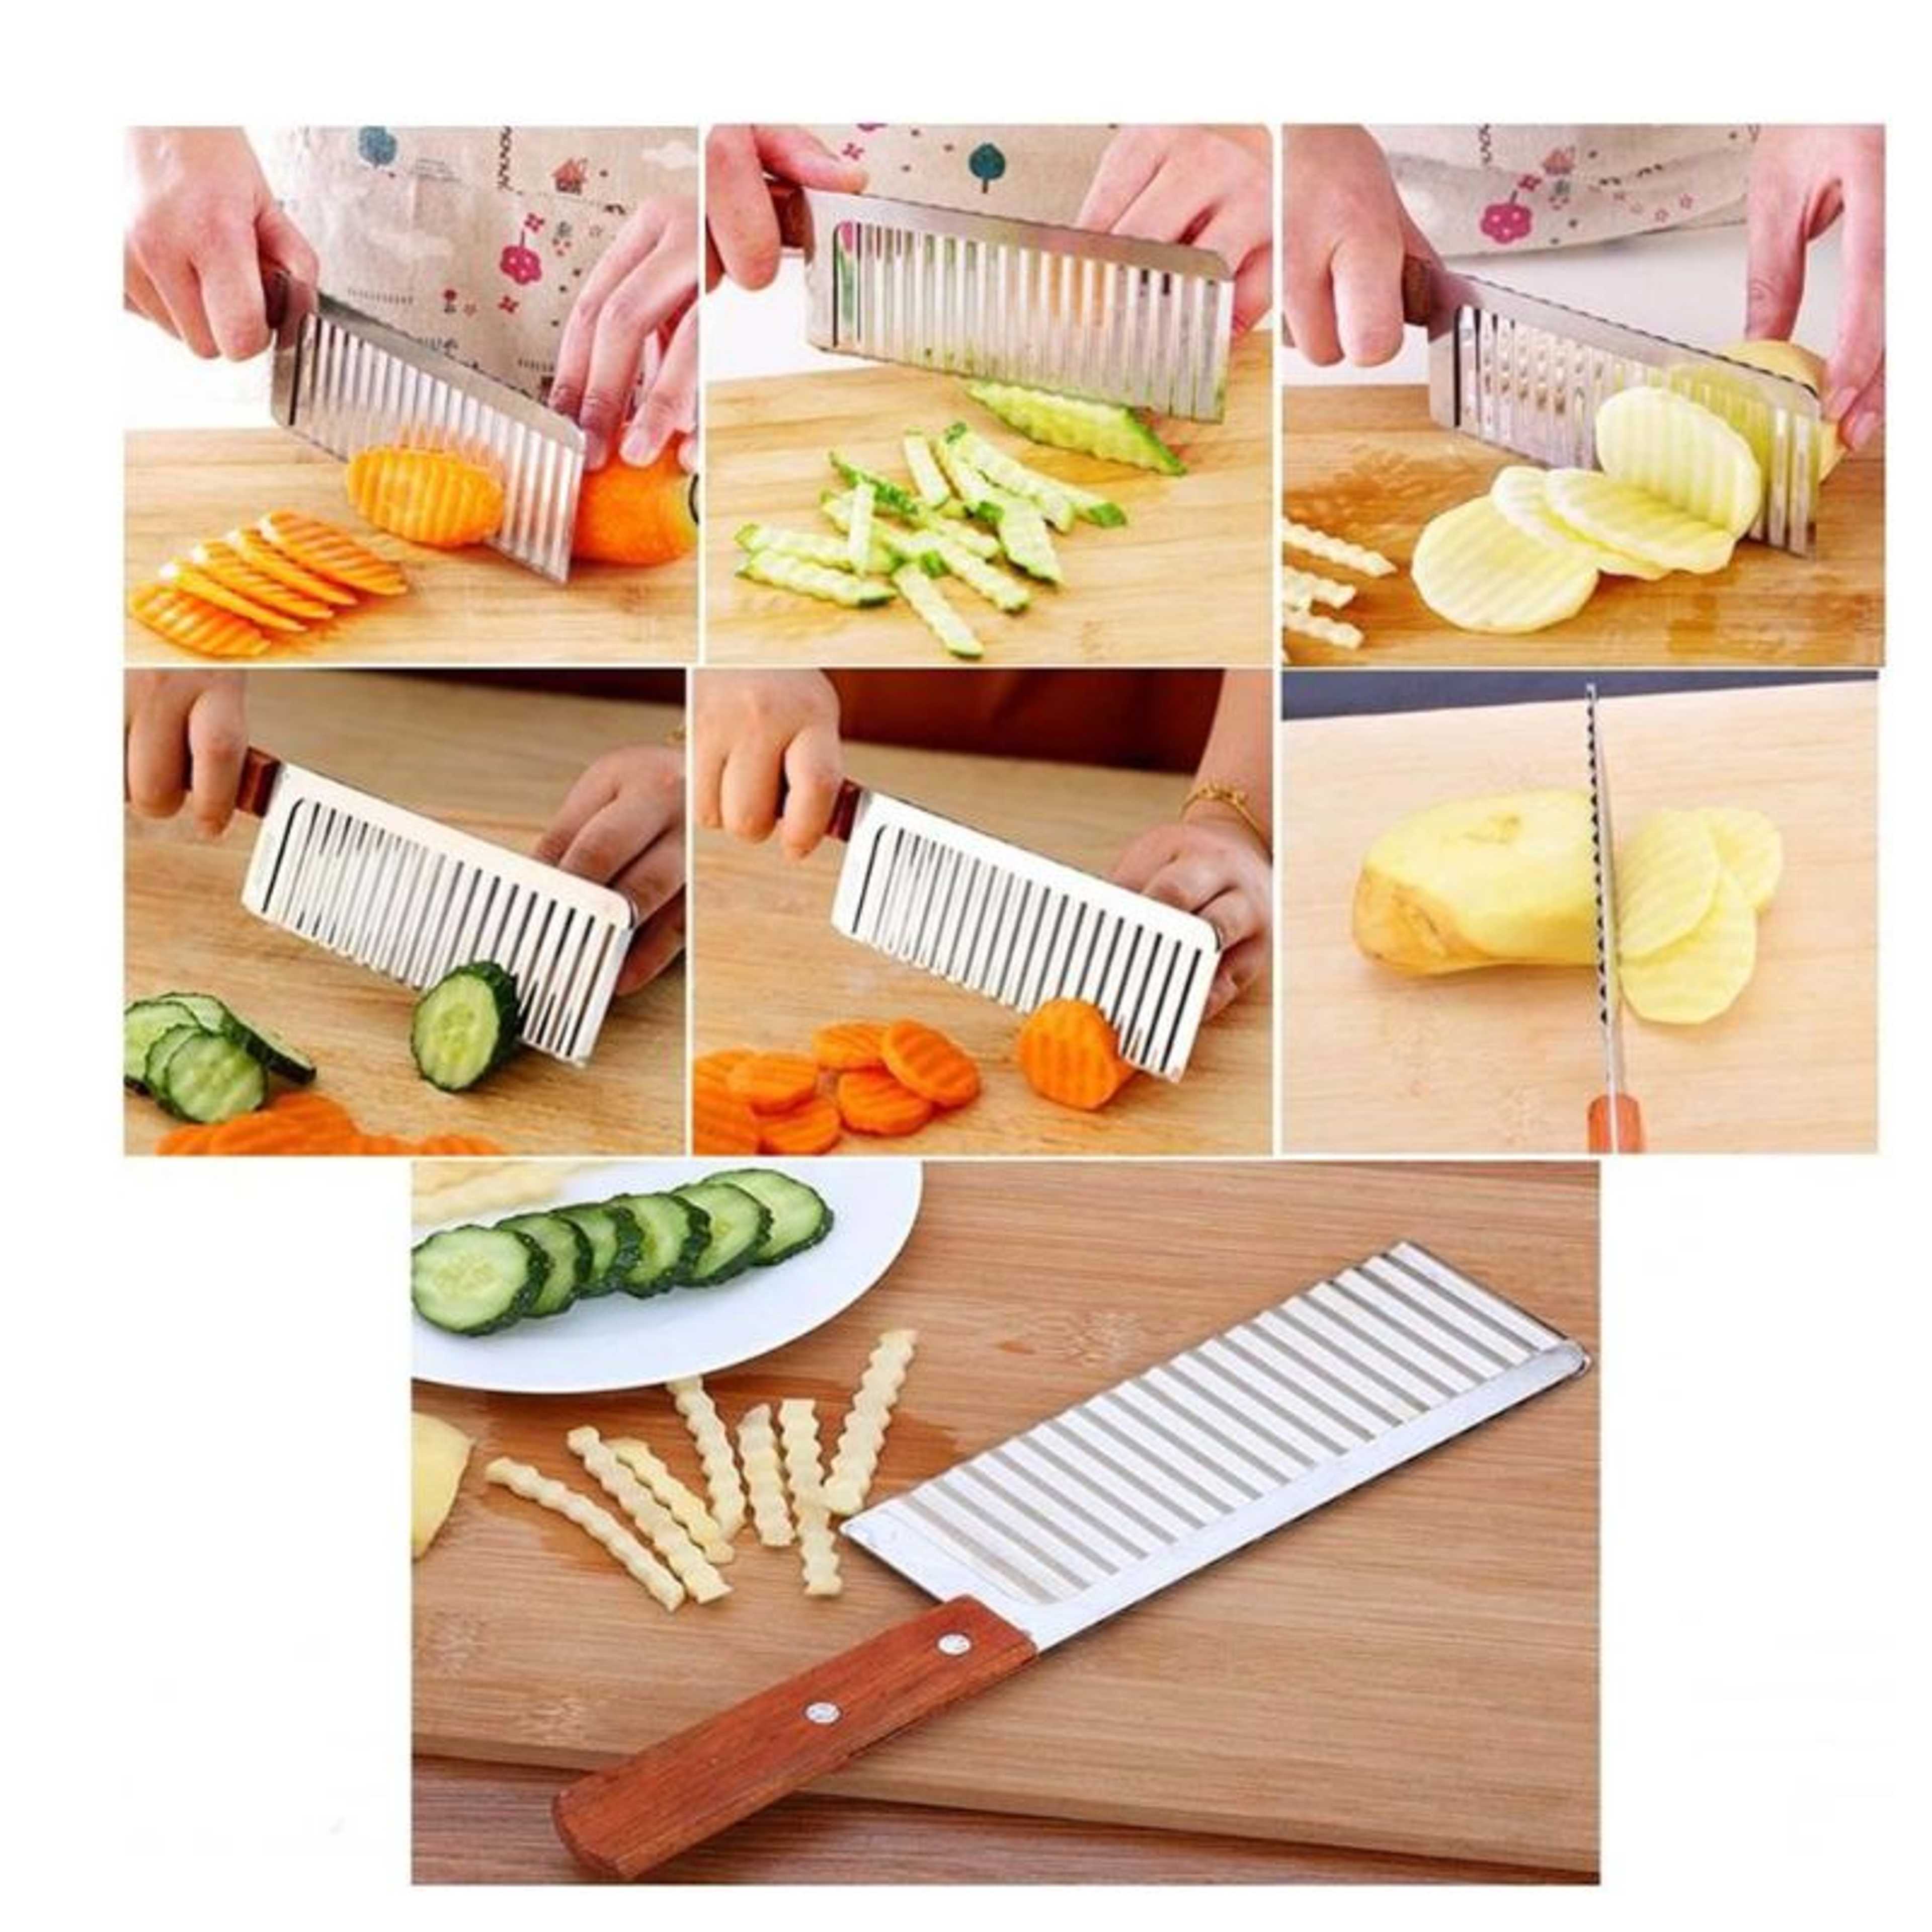 Crinkle Cut Potato/Chip/Fruit/Vegetable Wavy Blade Cutting Knife with Wooden Handle/French Fry Potato Cutter